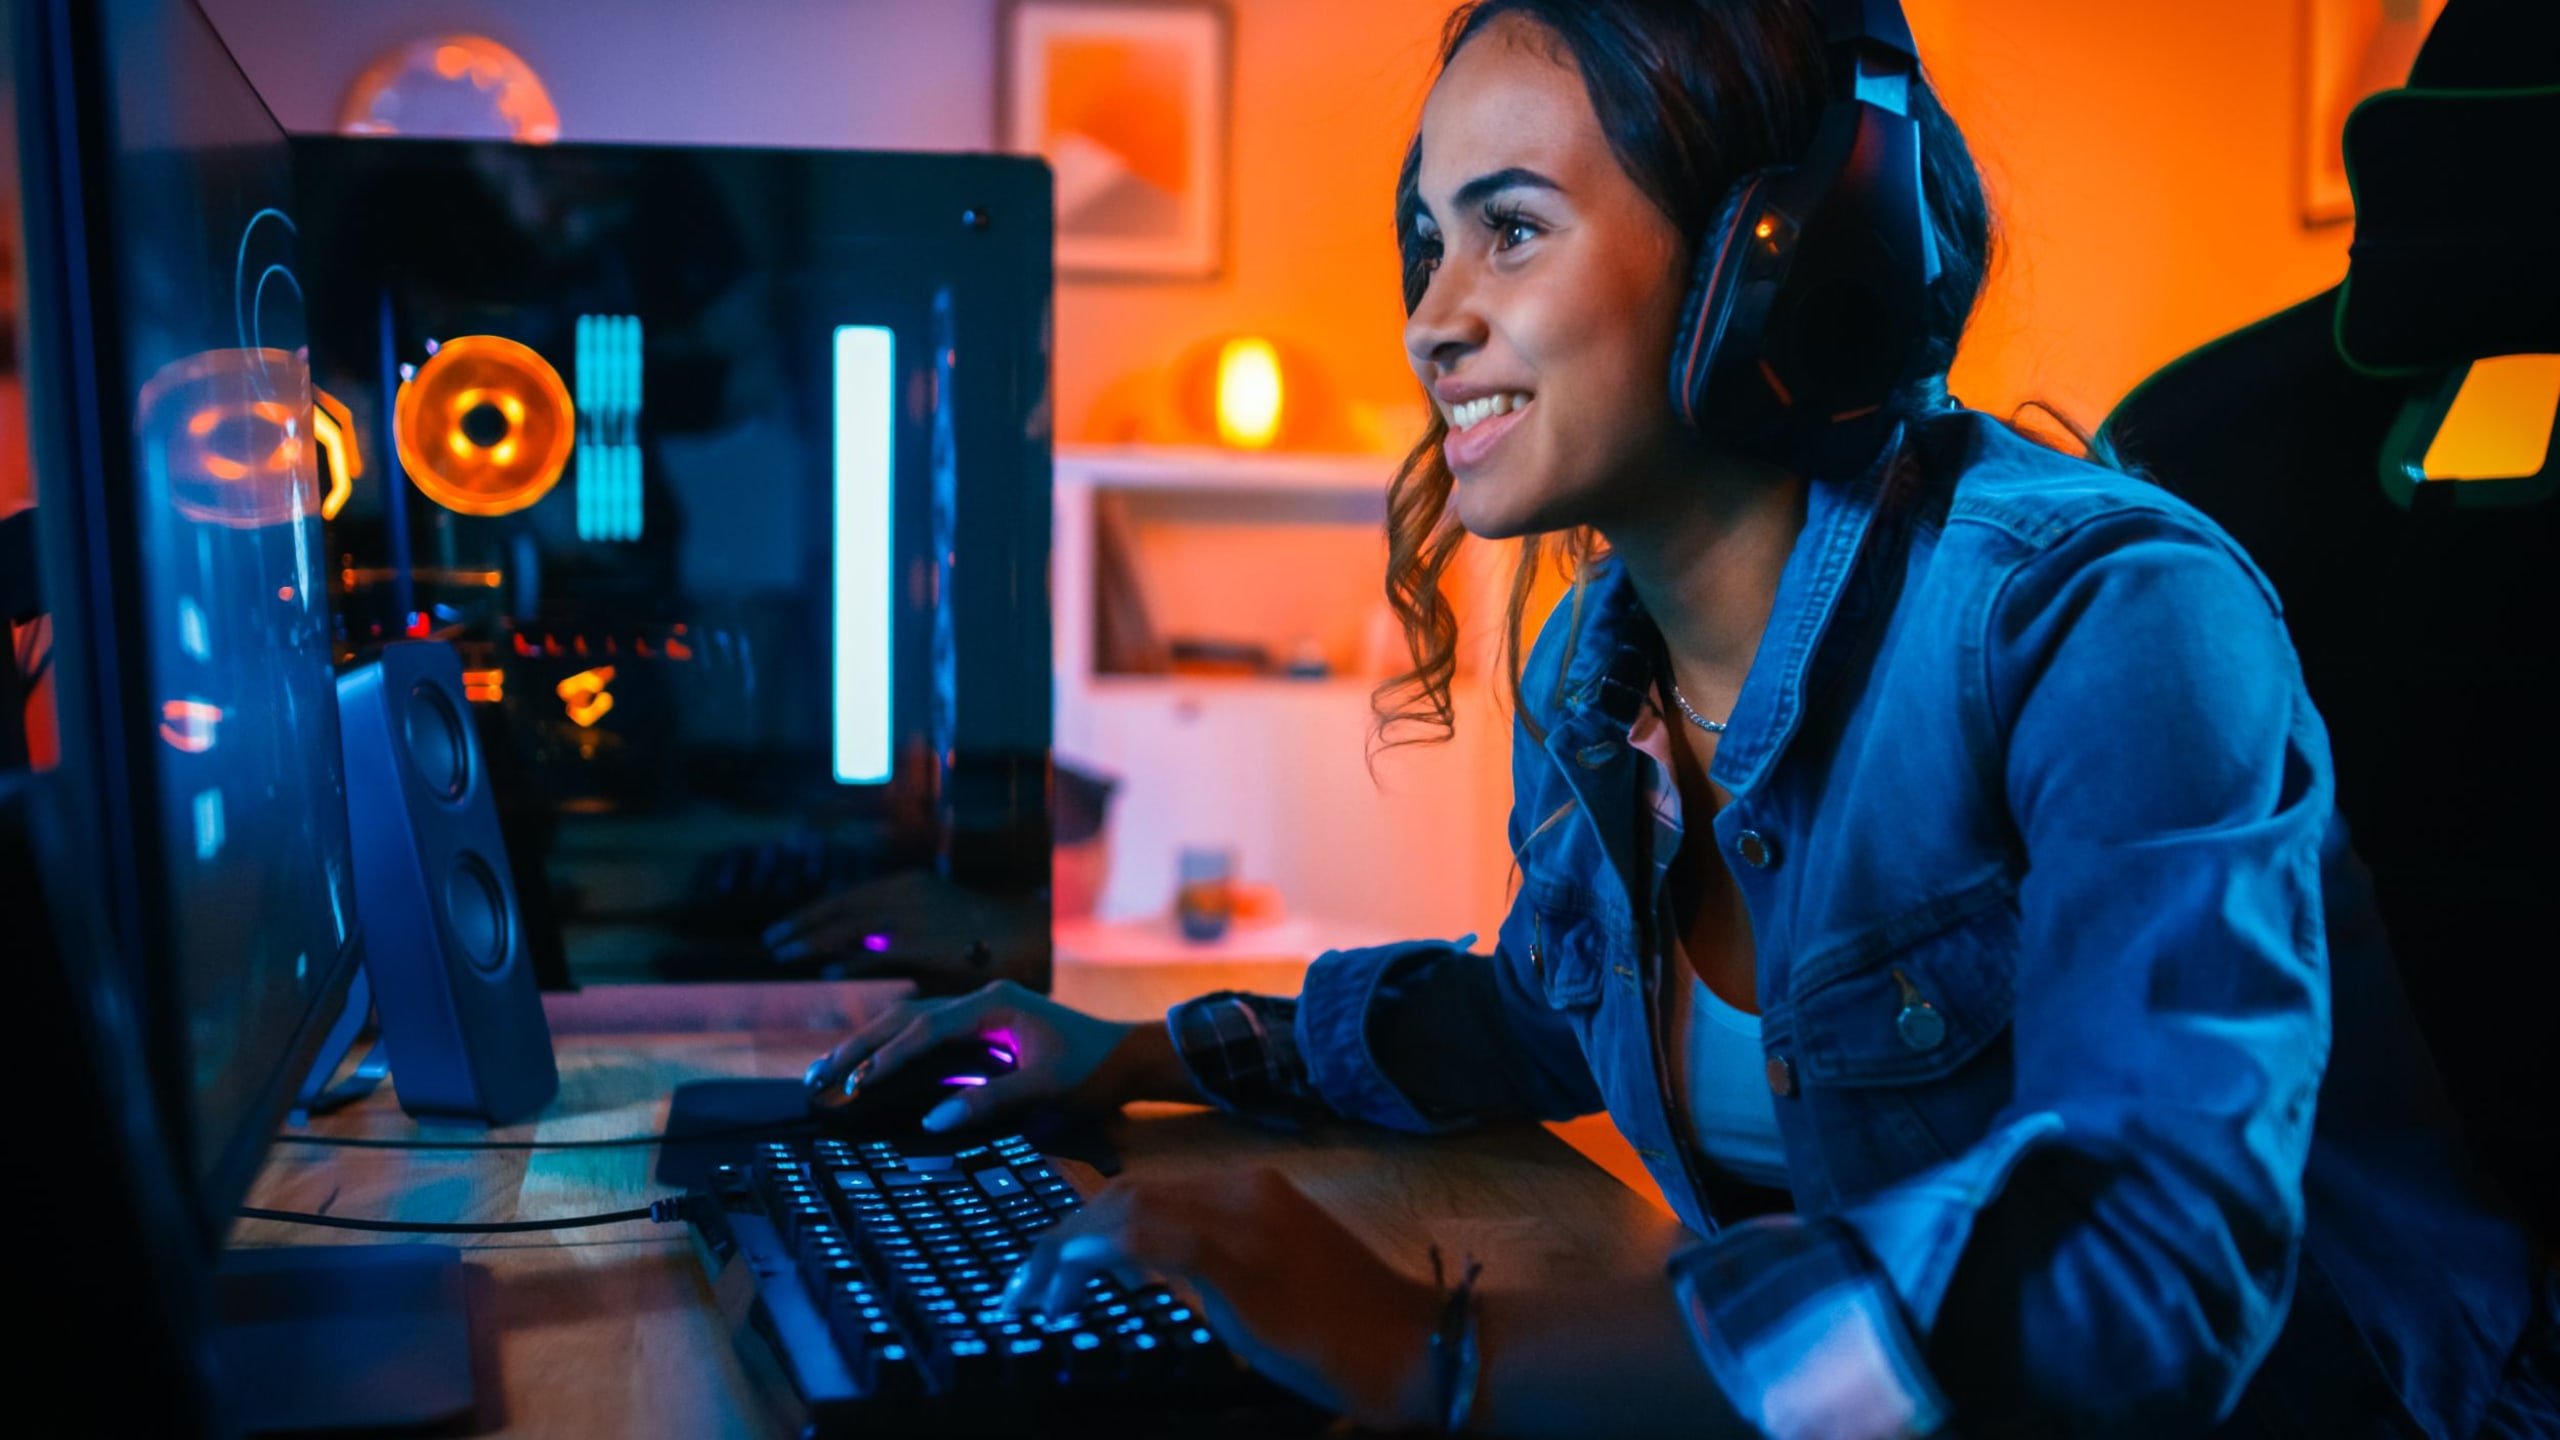 A young girl wearing headphones and playing online video games